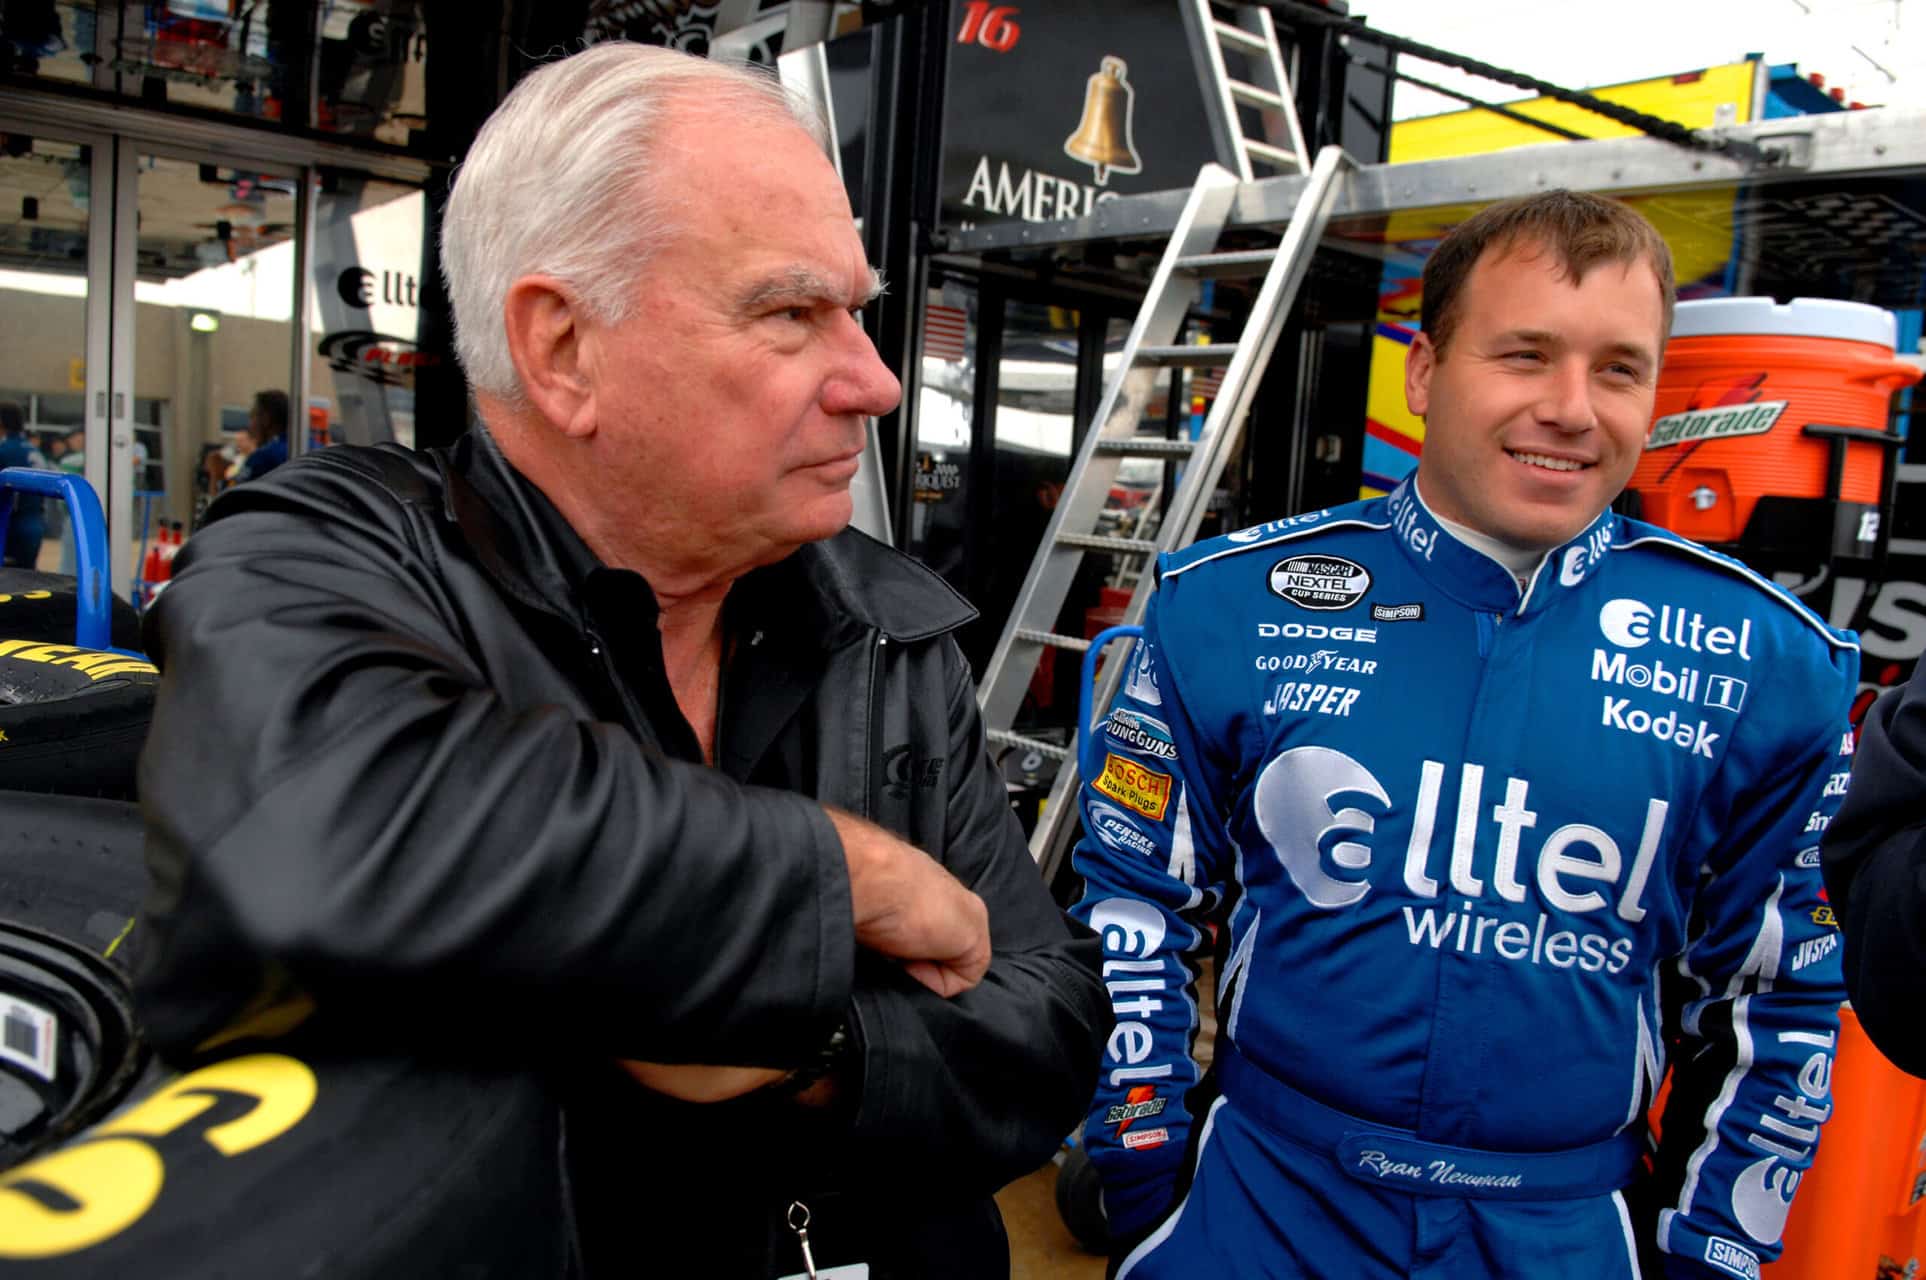 Don Miller (left) and Ryan Newman (right) at Texas Motor Speedway. Photo by NKP.